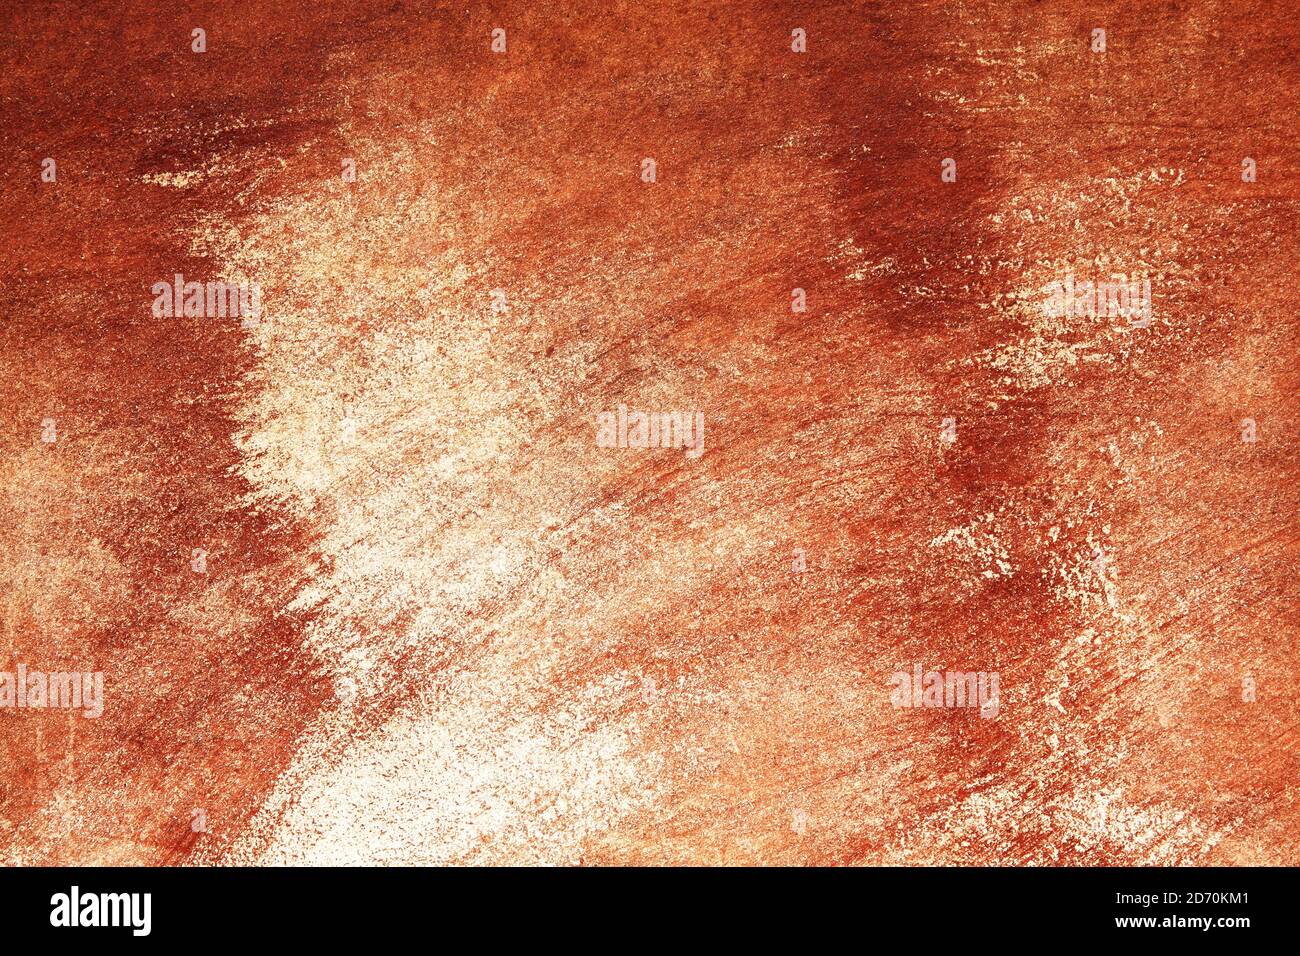 Rust covered iron sheet metal texture background Stock Photo